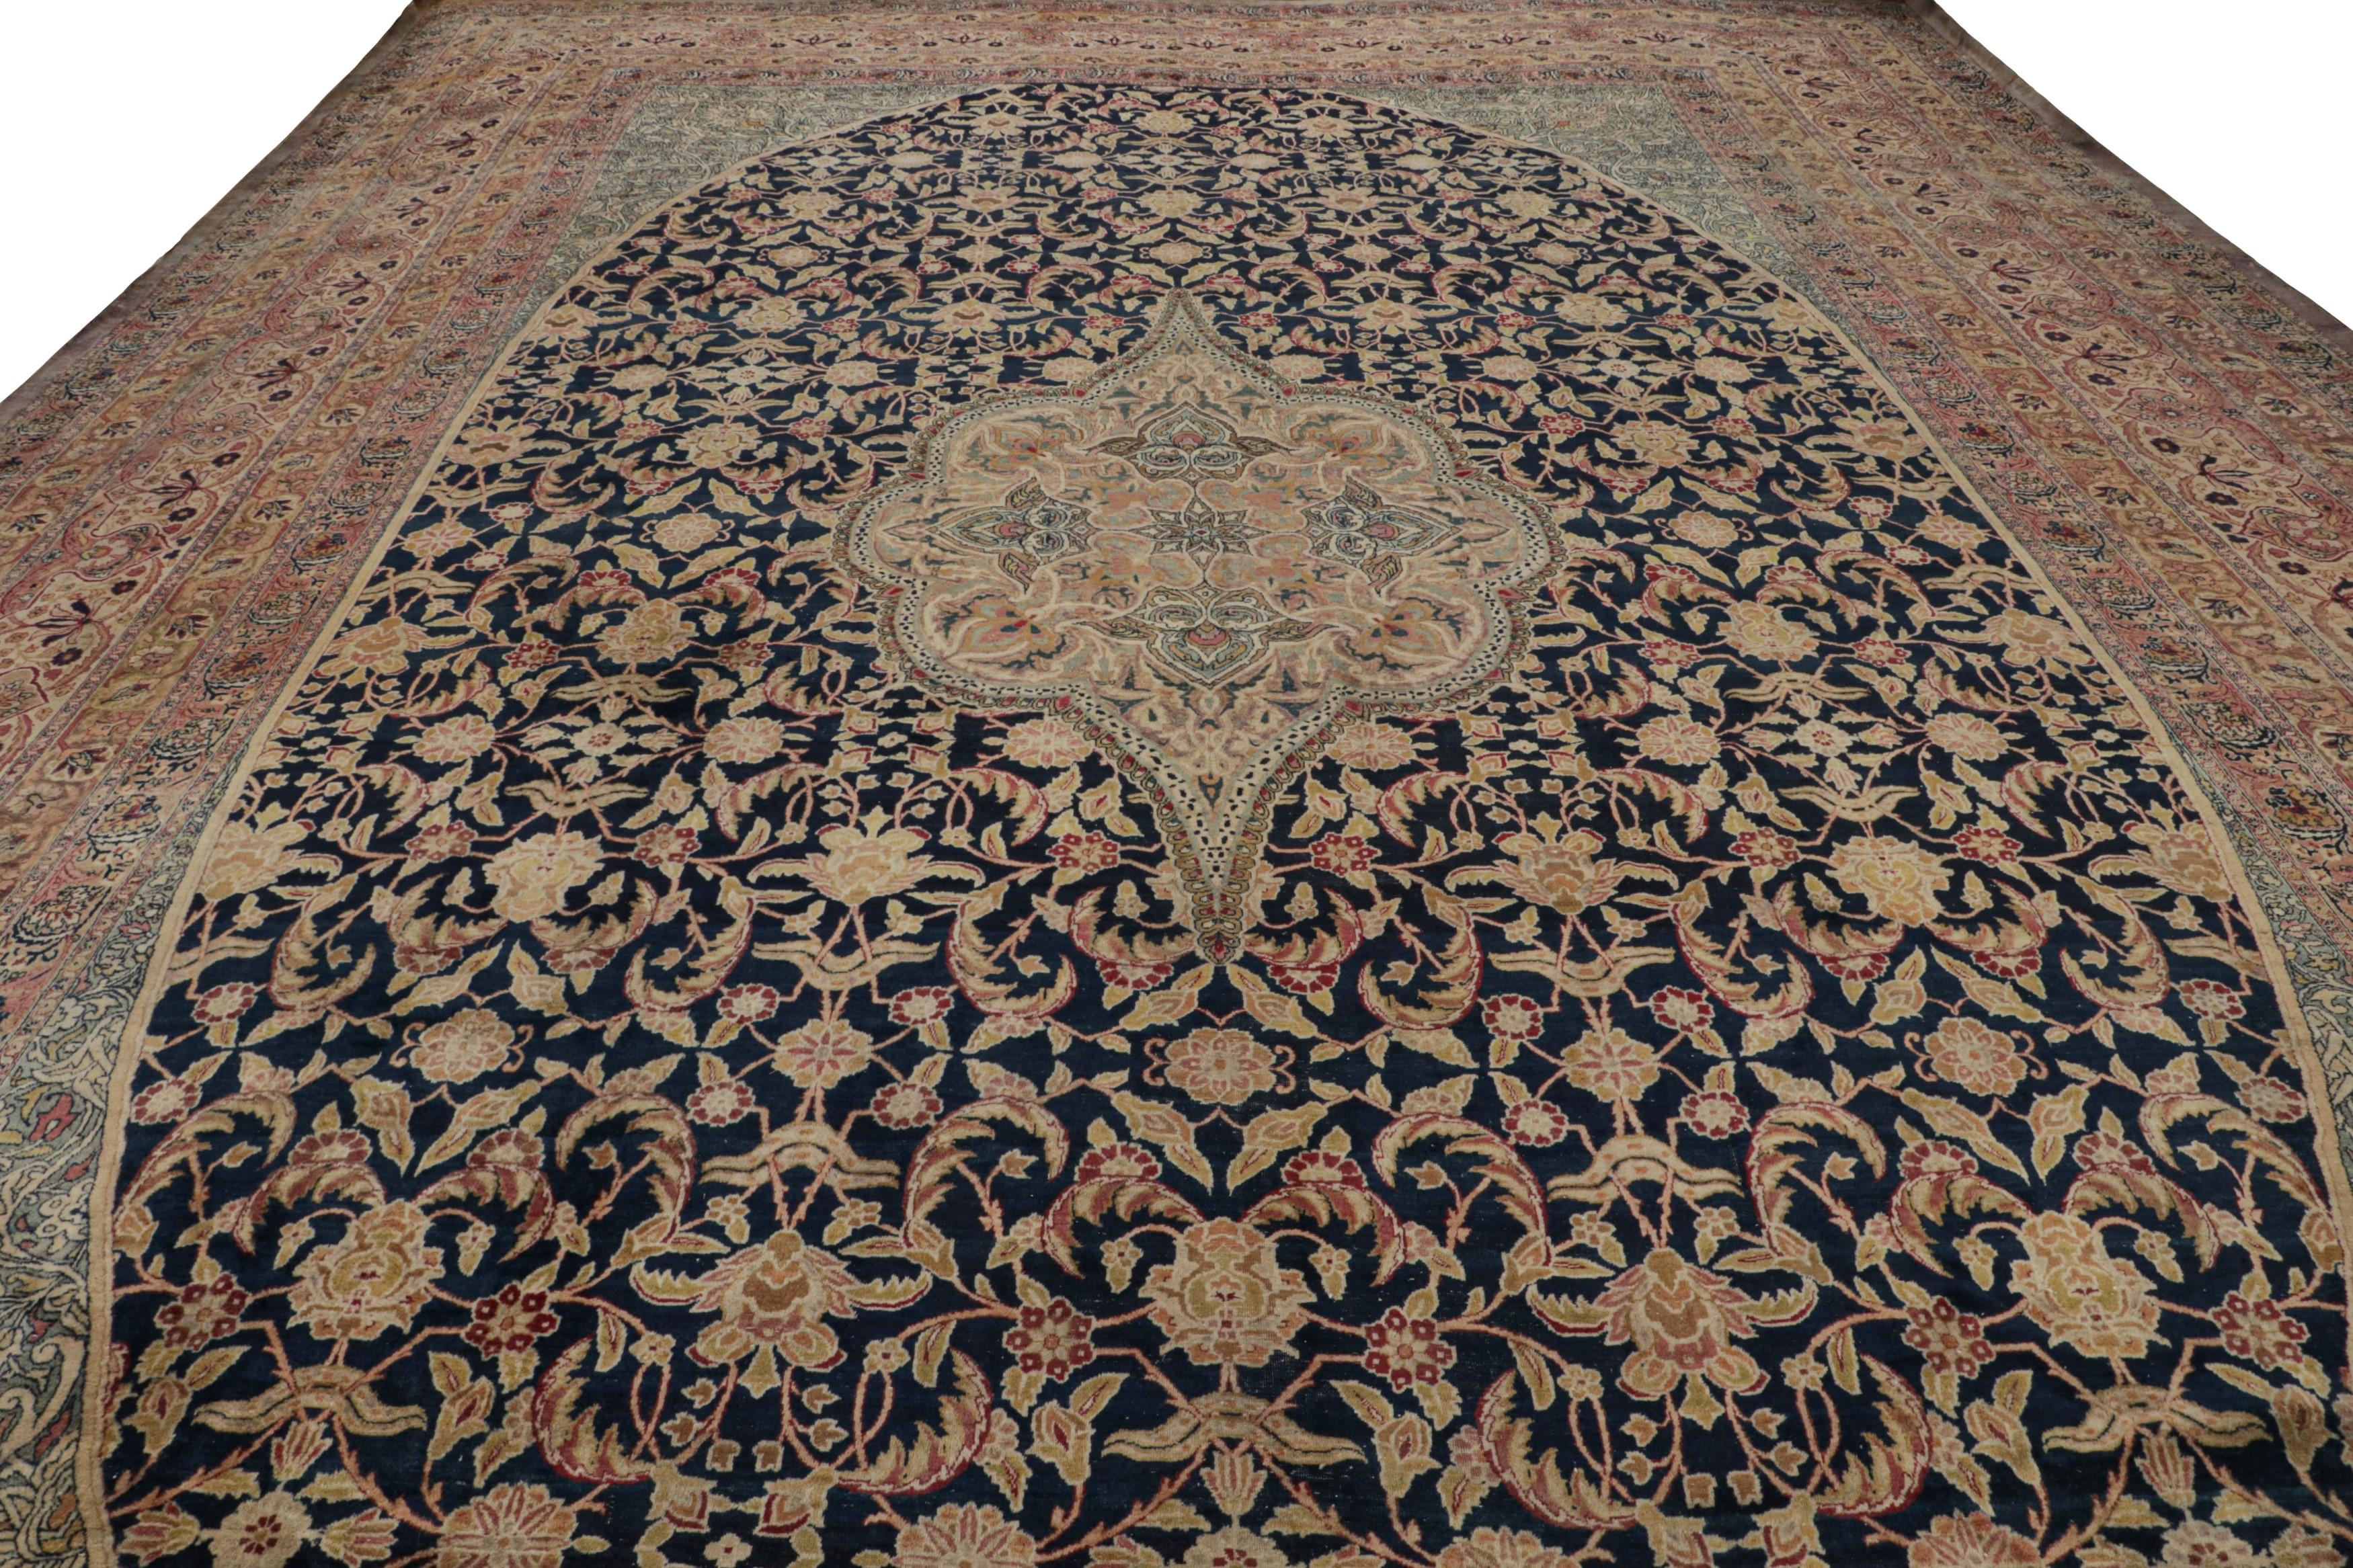 Hand-Woven Antique Persian Kerman Lavar rug, with Floral Patterns For Sale